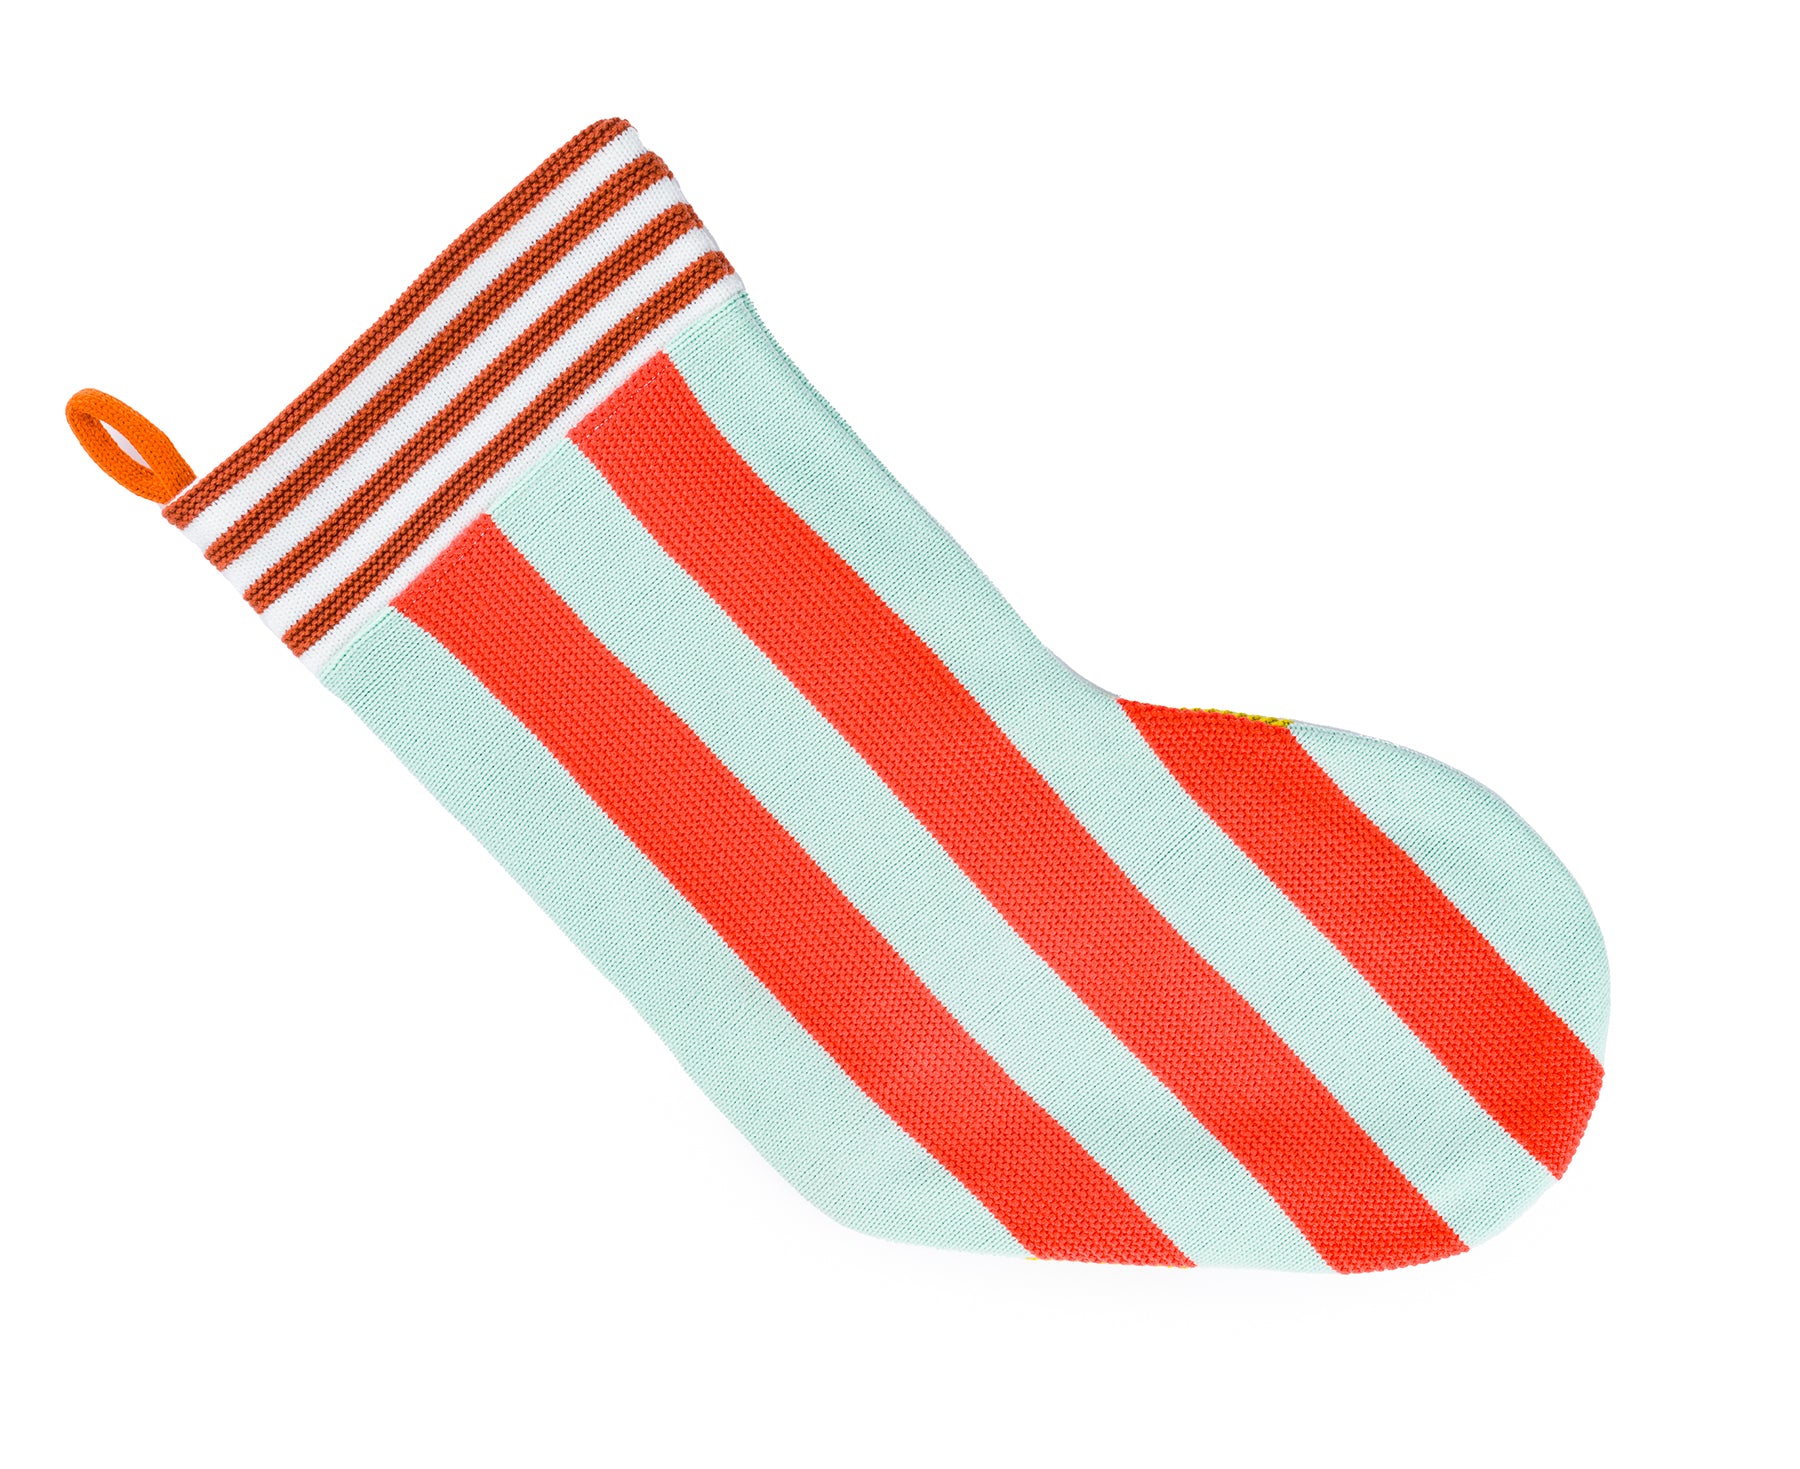 Super Stripe Stocking in Mint and Golden Olive by Verloop